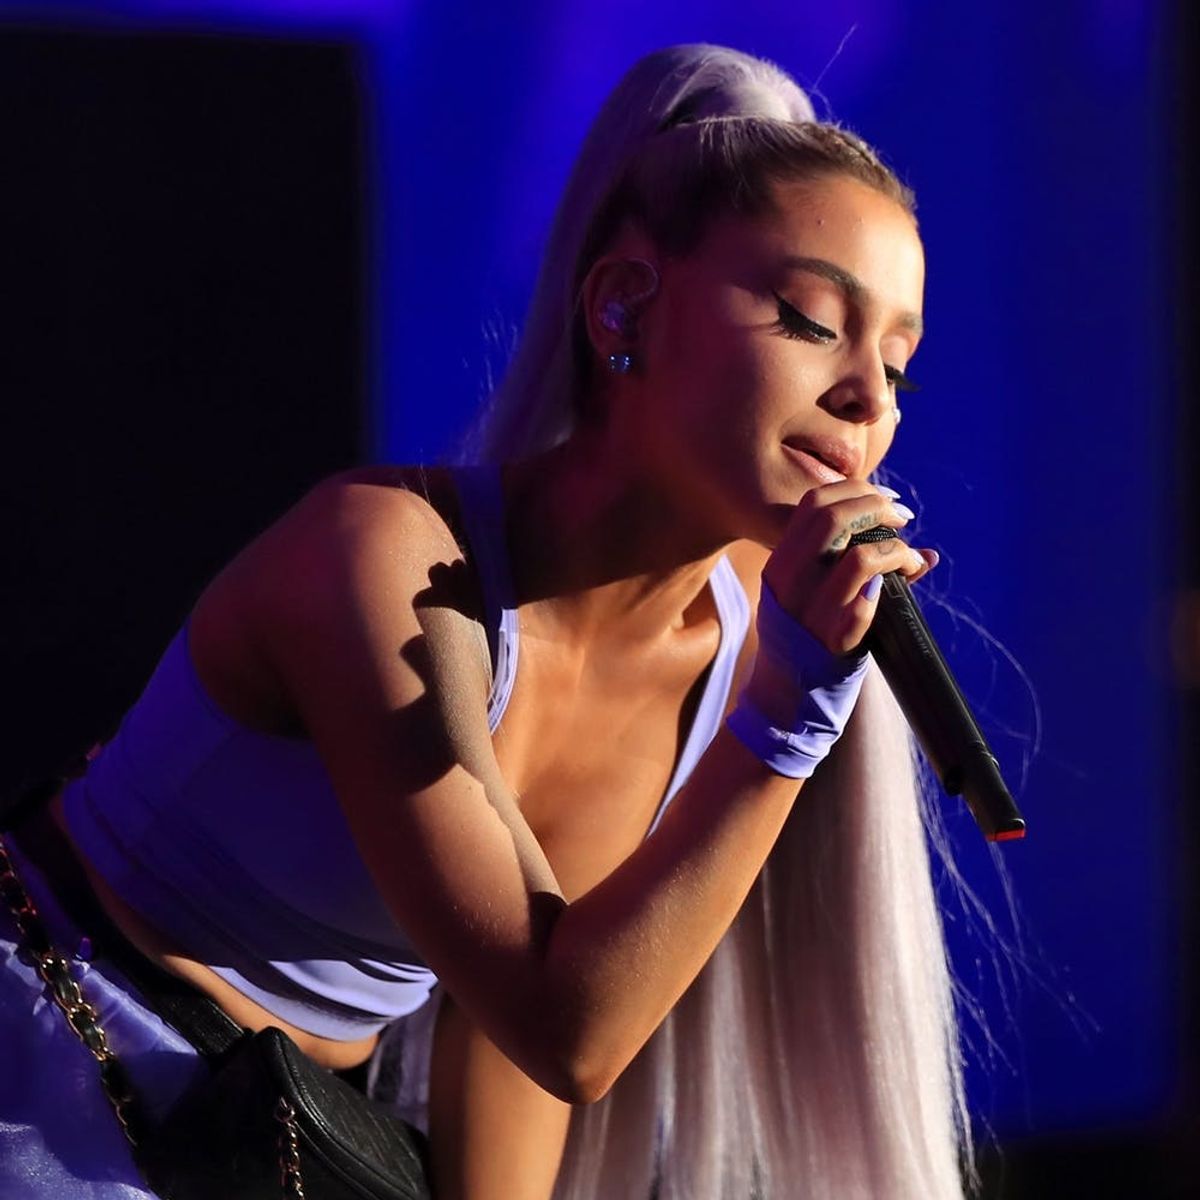 Ariana Grande Just Dished All the Details on Her New Album